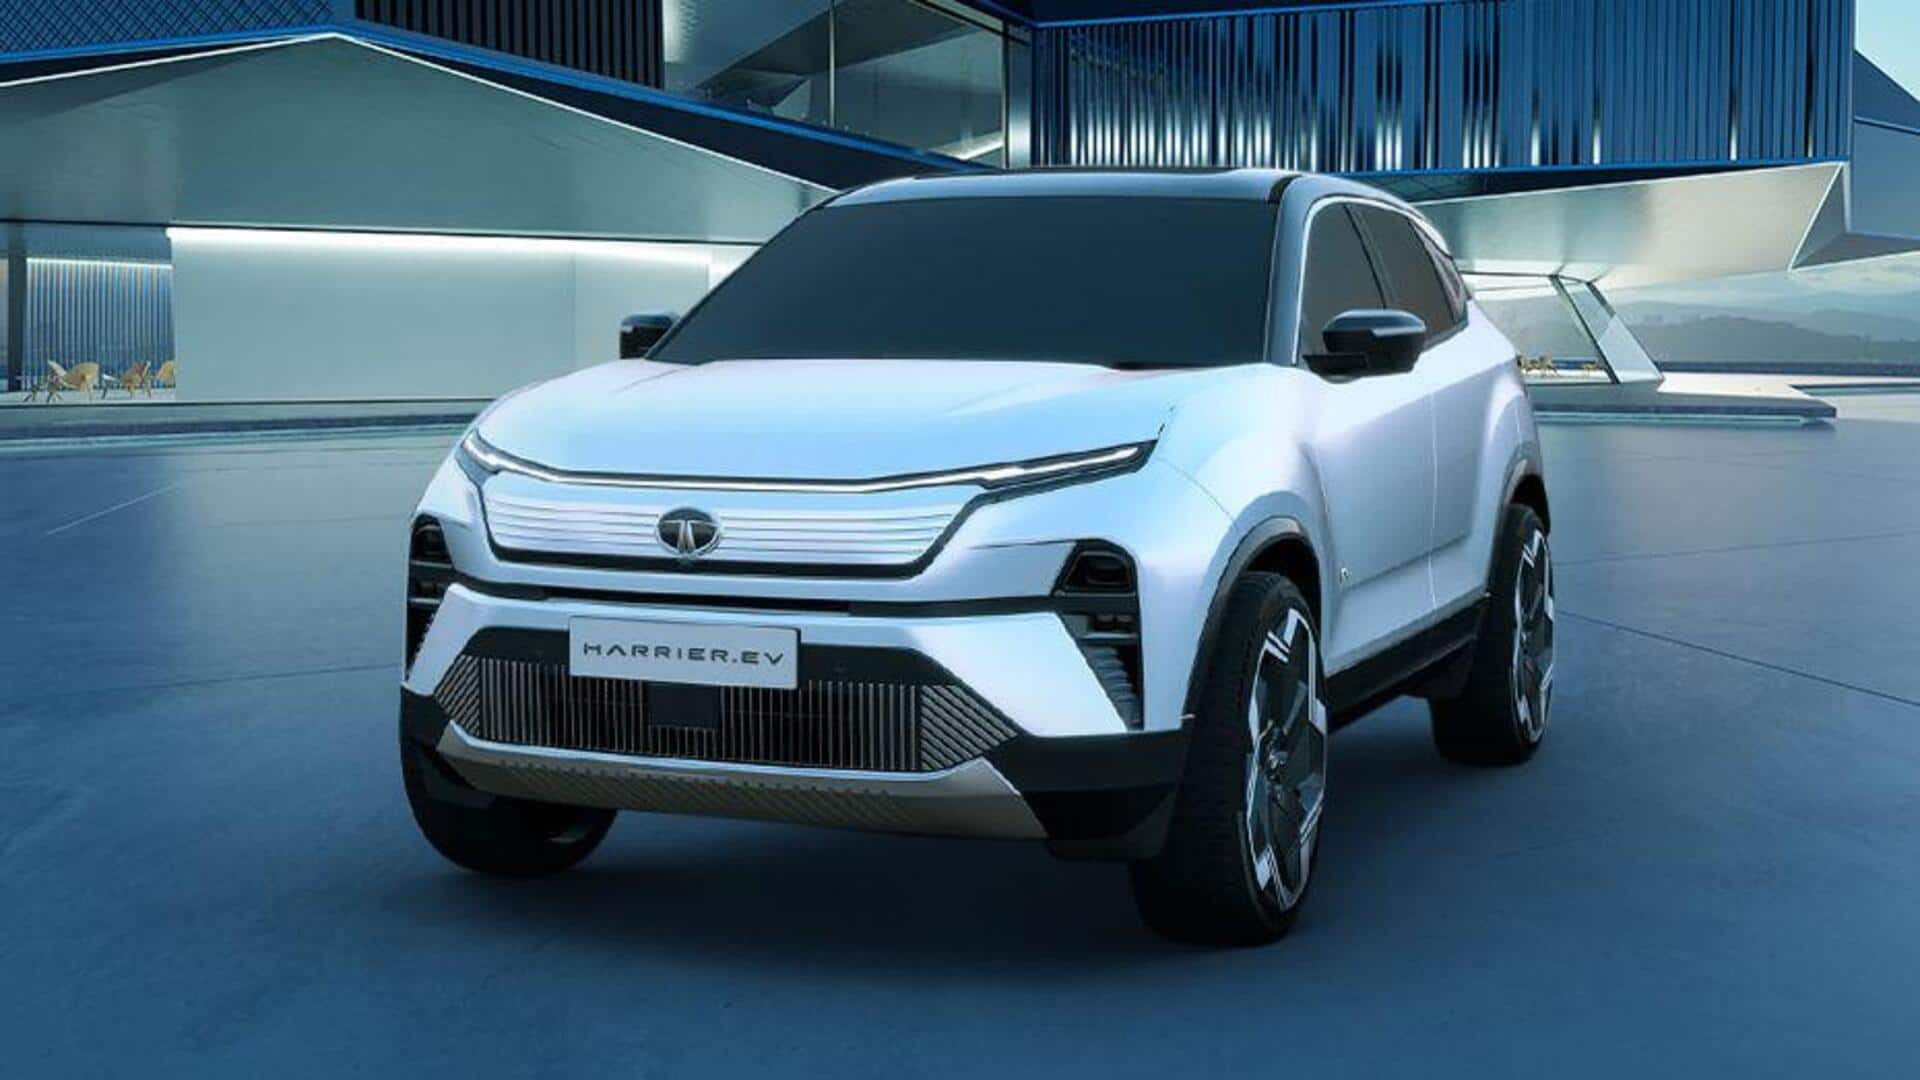 Tata Harrier EV's patent images leak before debut: Expected features